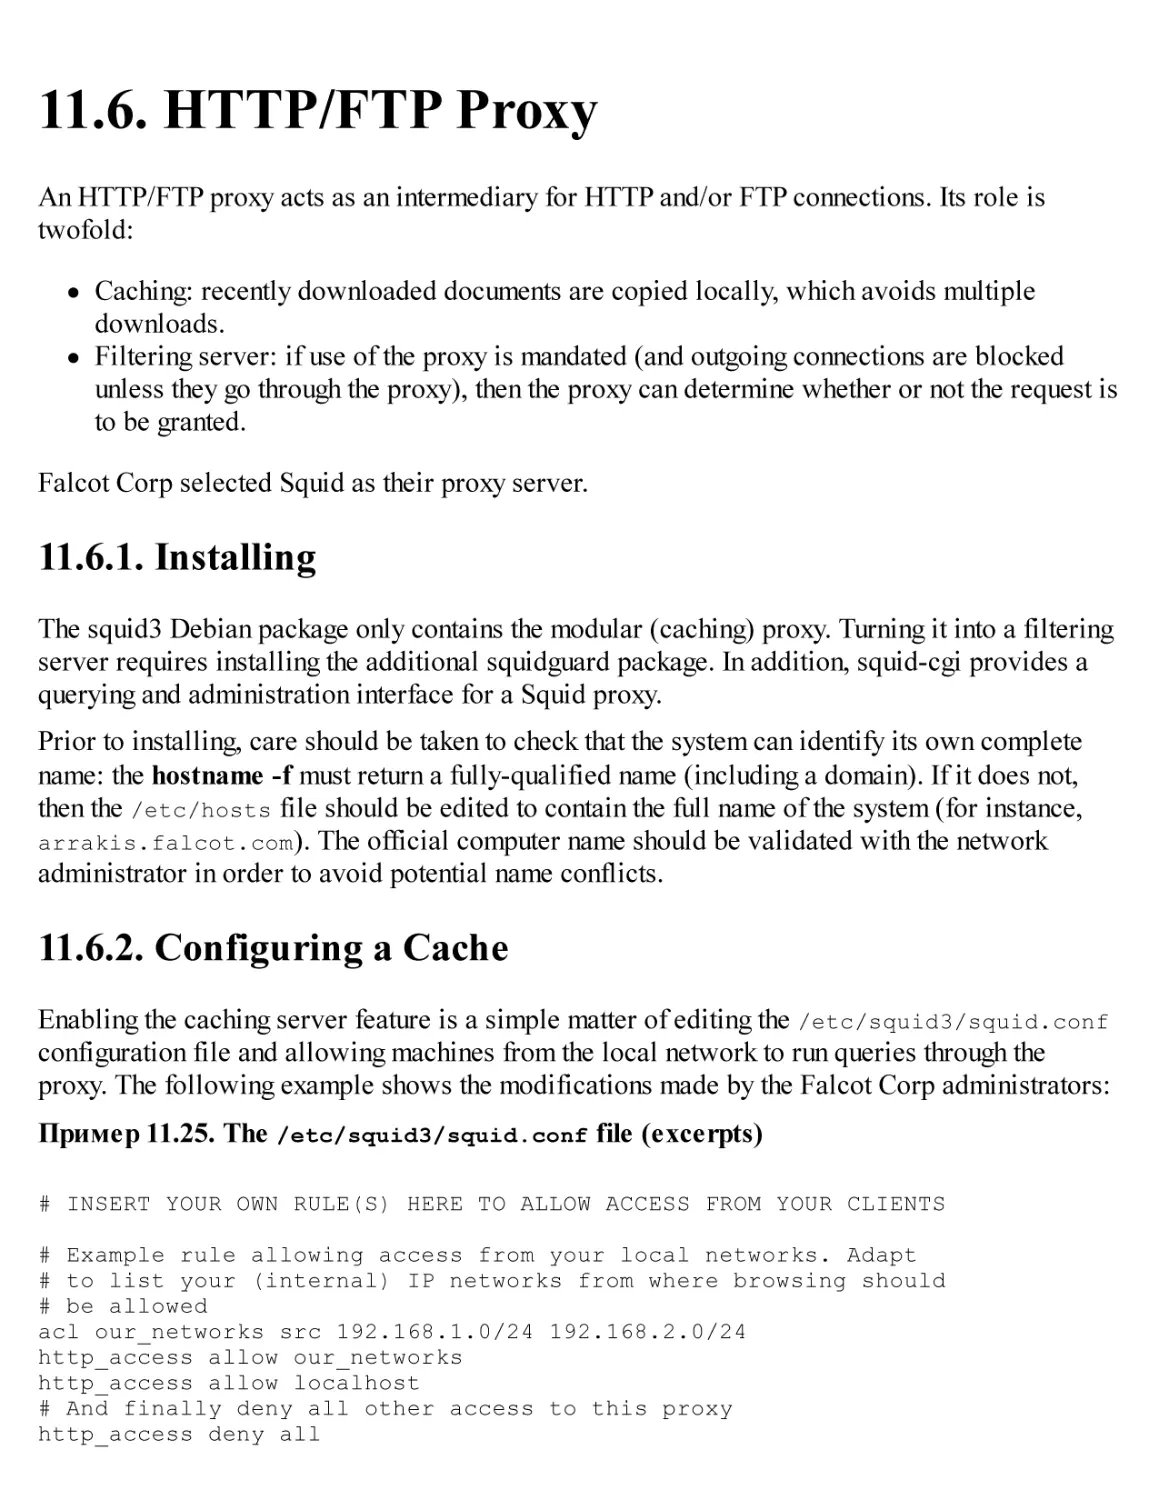 11.6. HTTP/FTP Proxy
11.6.1. Installing
11.6.2. Configuring a Cache